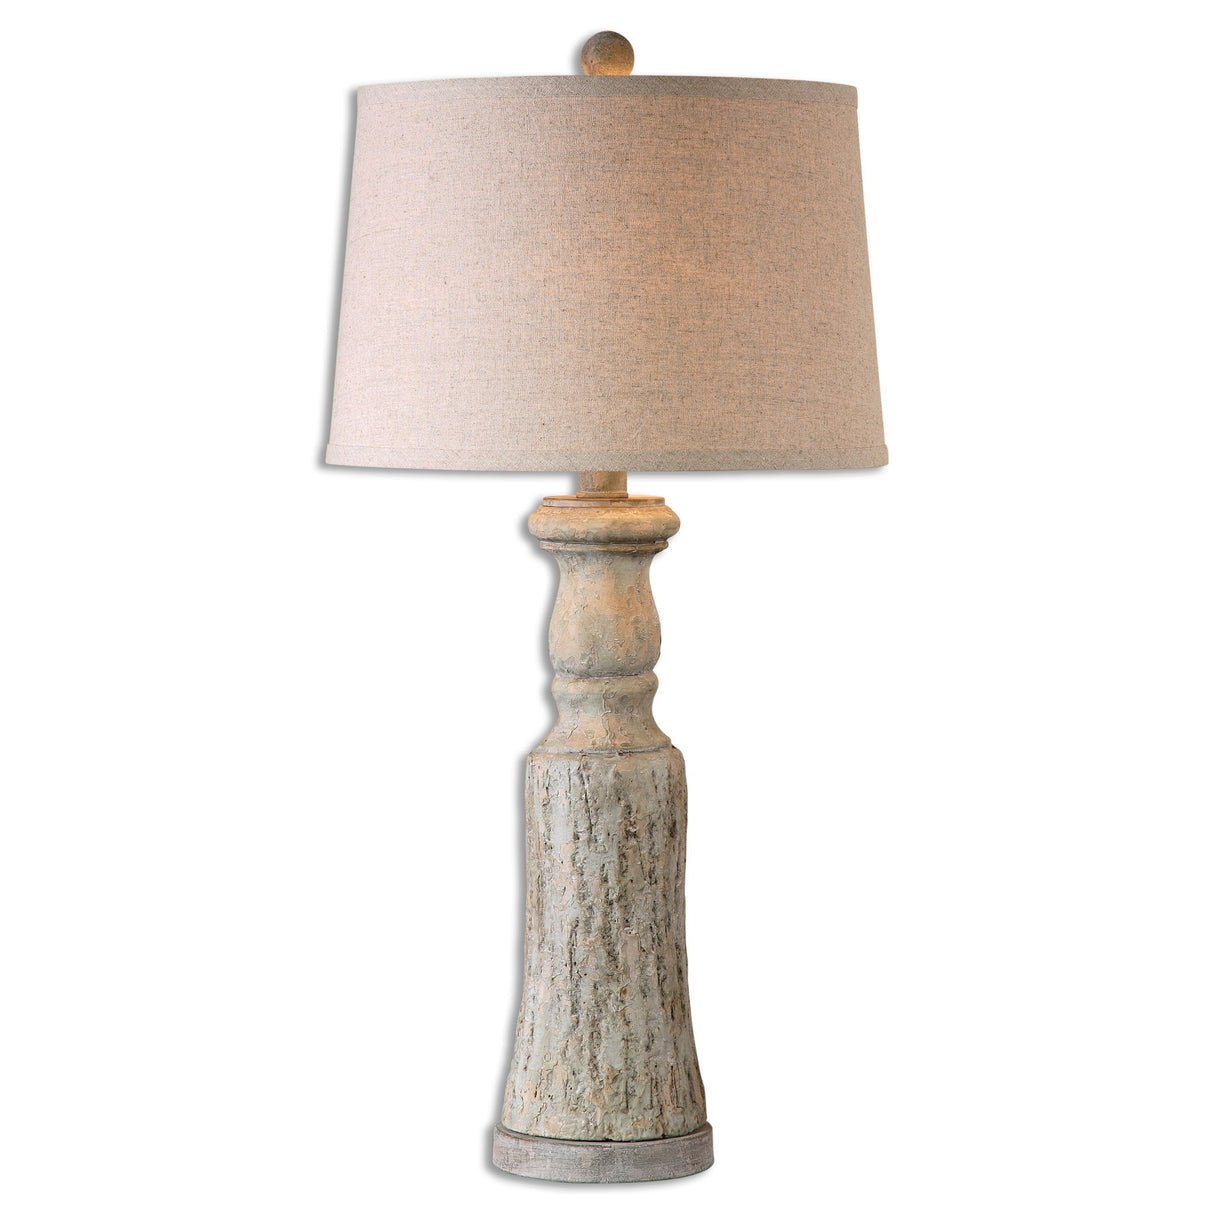 Cloverly - Table Lamp, Set Of 2 - Beige